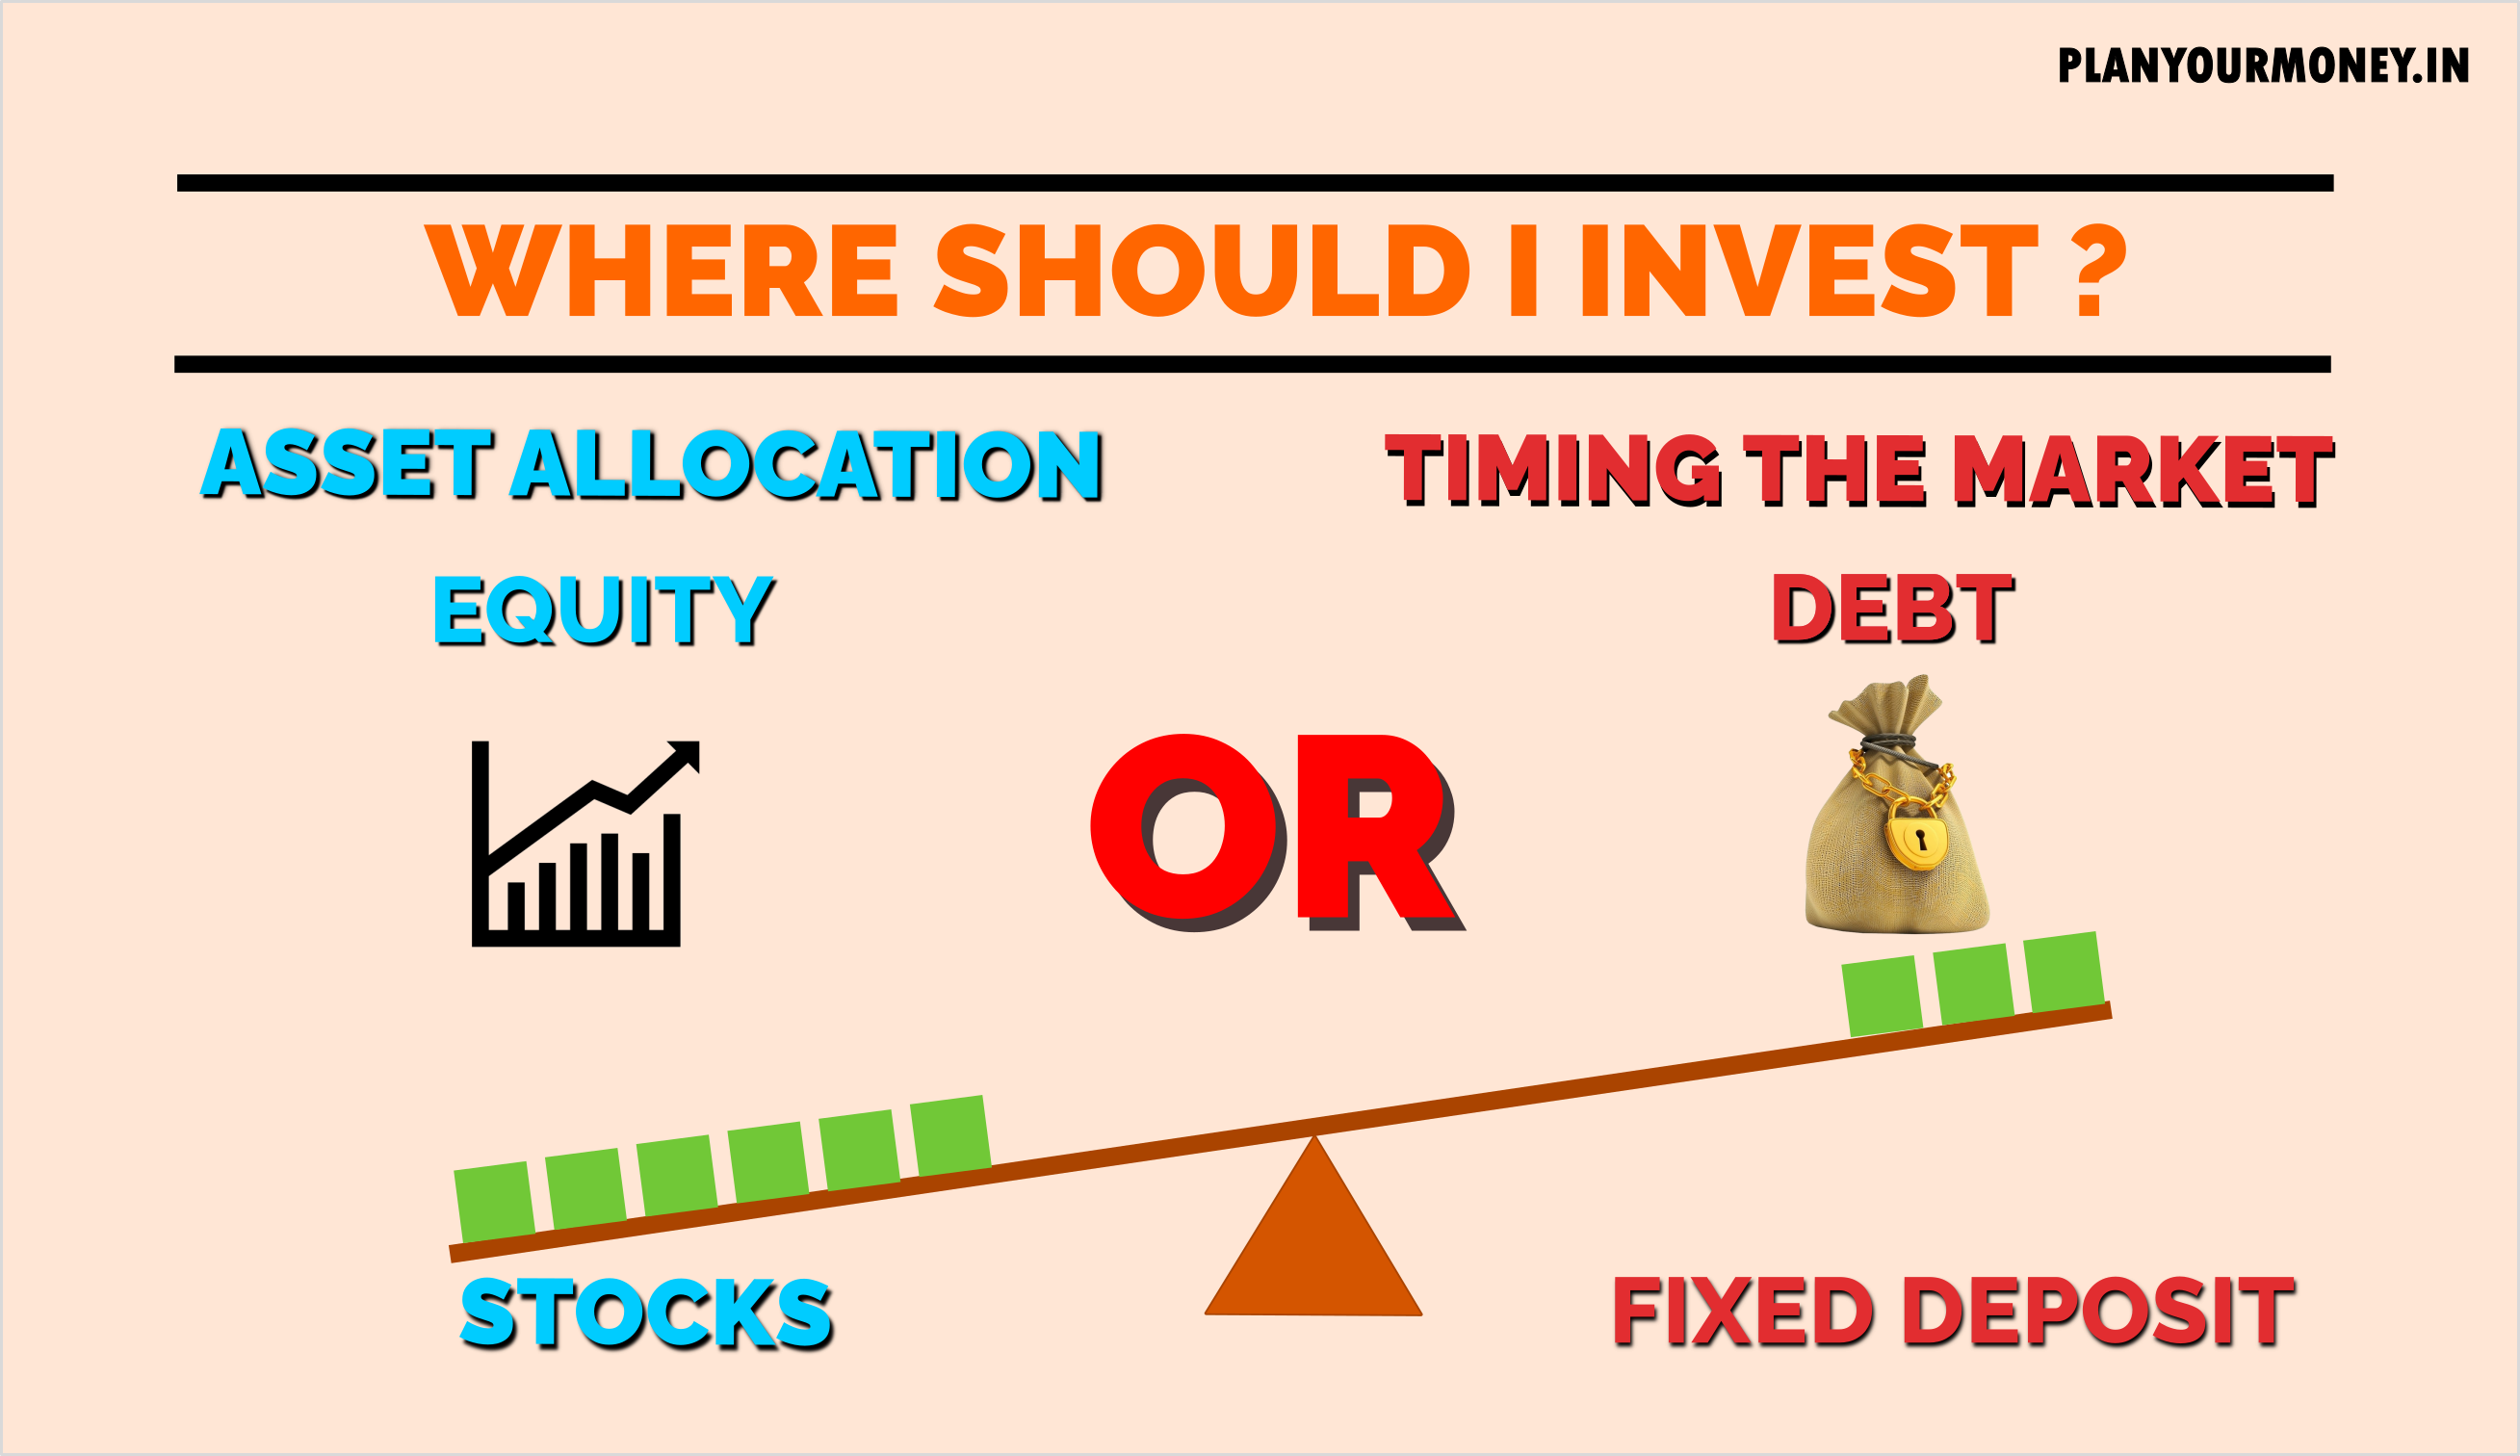 Where should I invest ? Plan Your Money